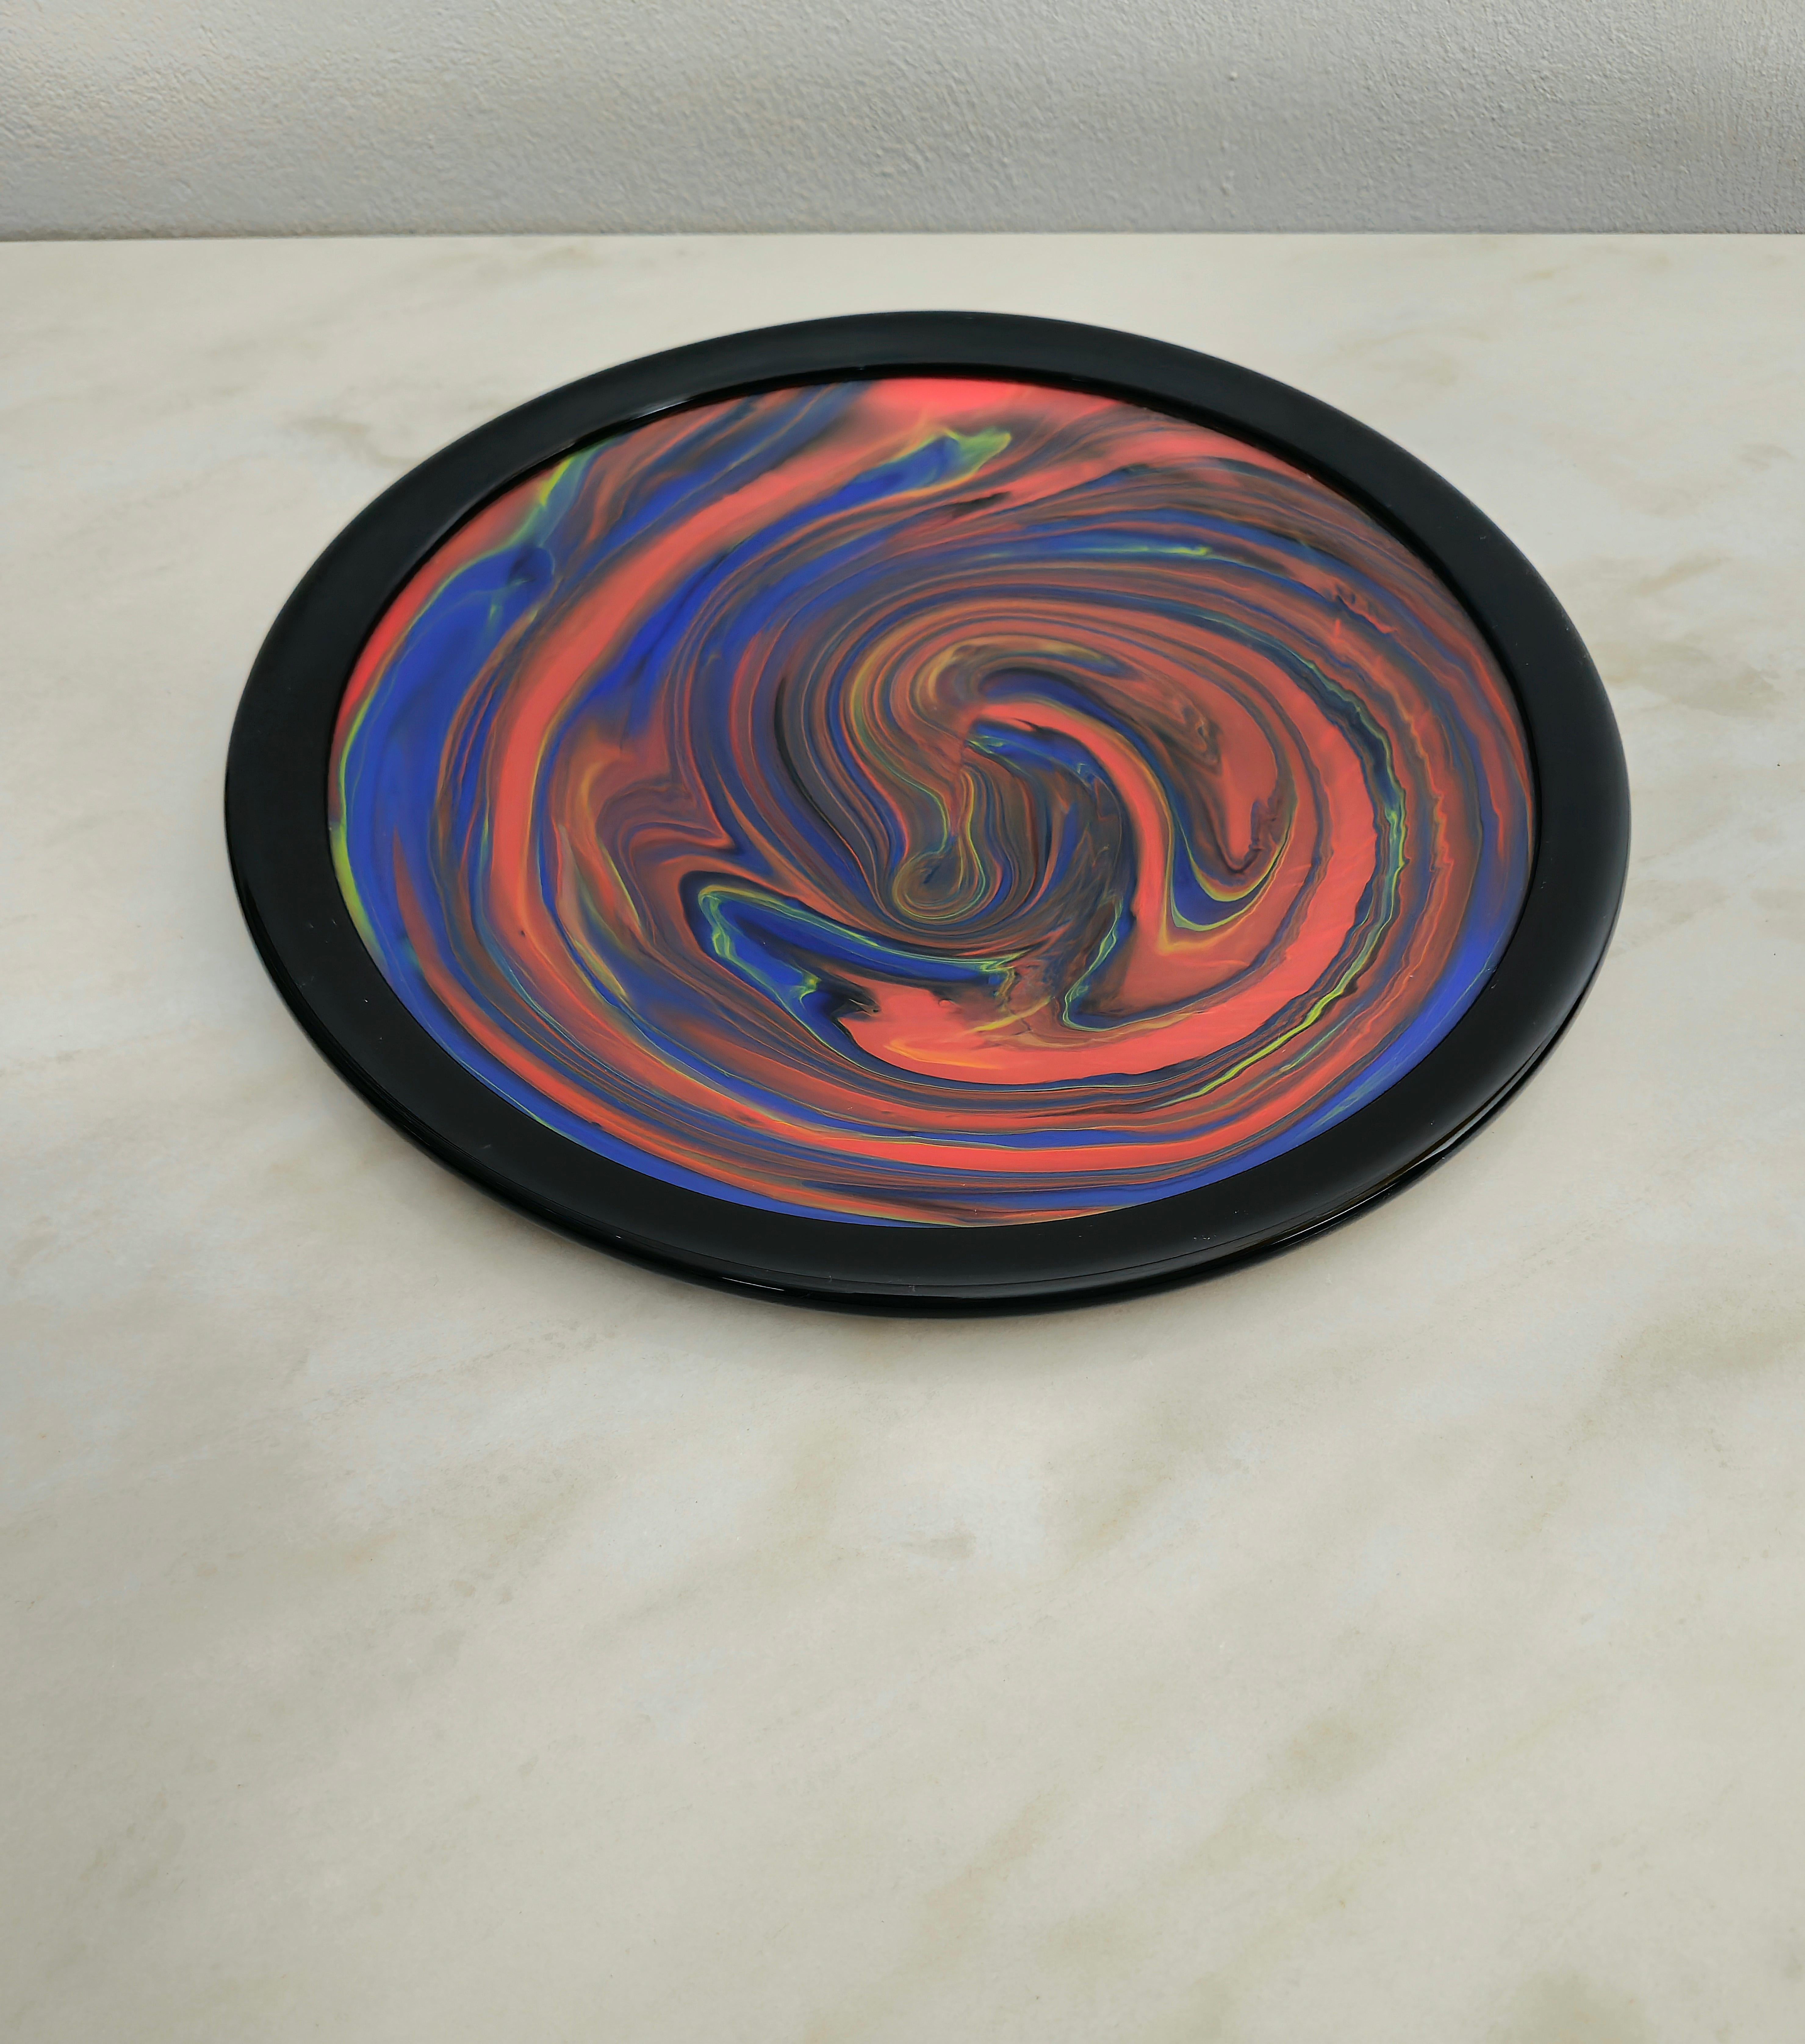 Large plate/decorative object model Mercucio 1104 designed by Missoni and produced in the 1980s by the Italian company Arte Vetro Murano.
The object was made by hand in polychrome and black overlaid Murano glass with multicolored shades.